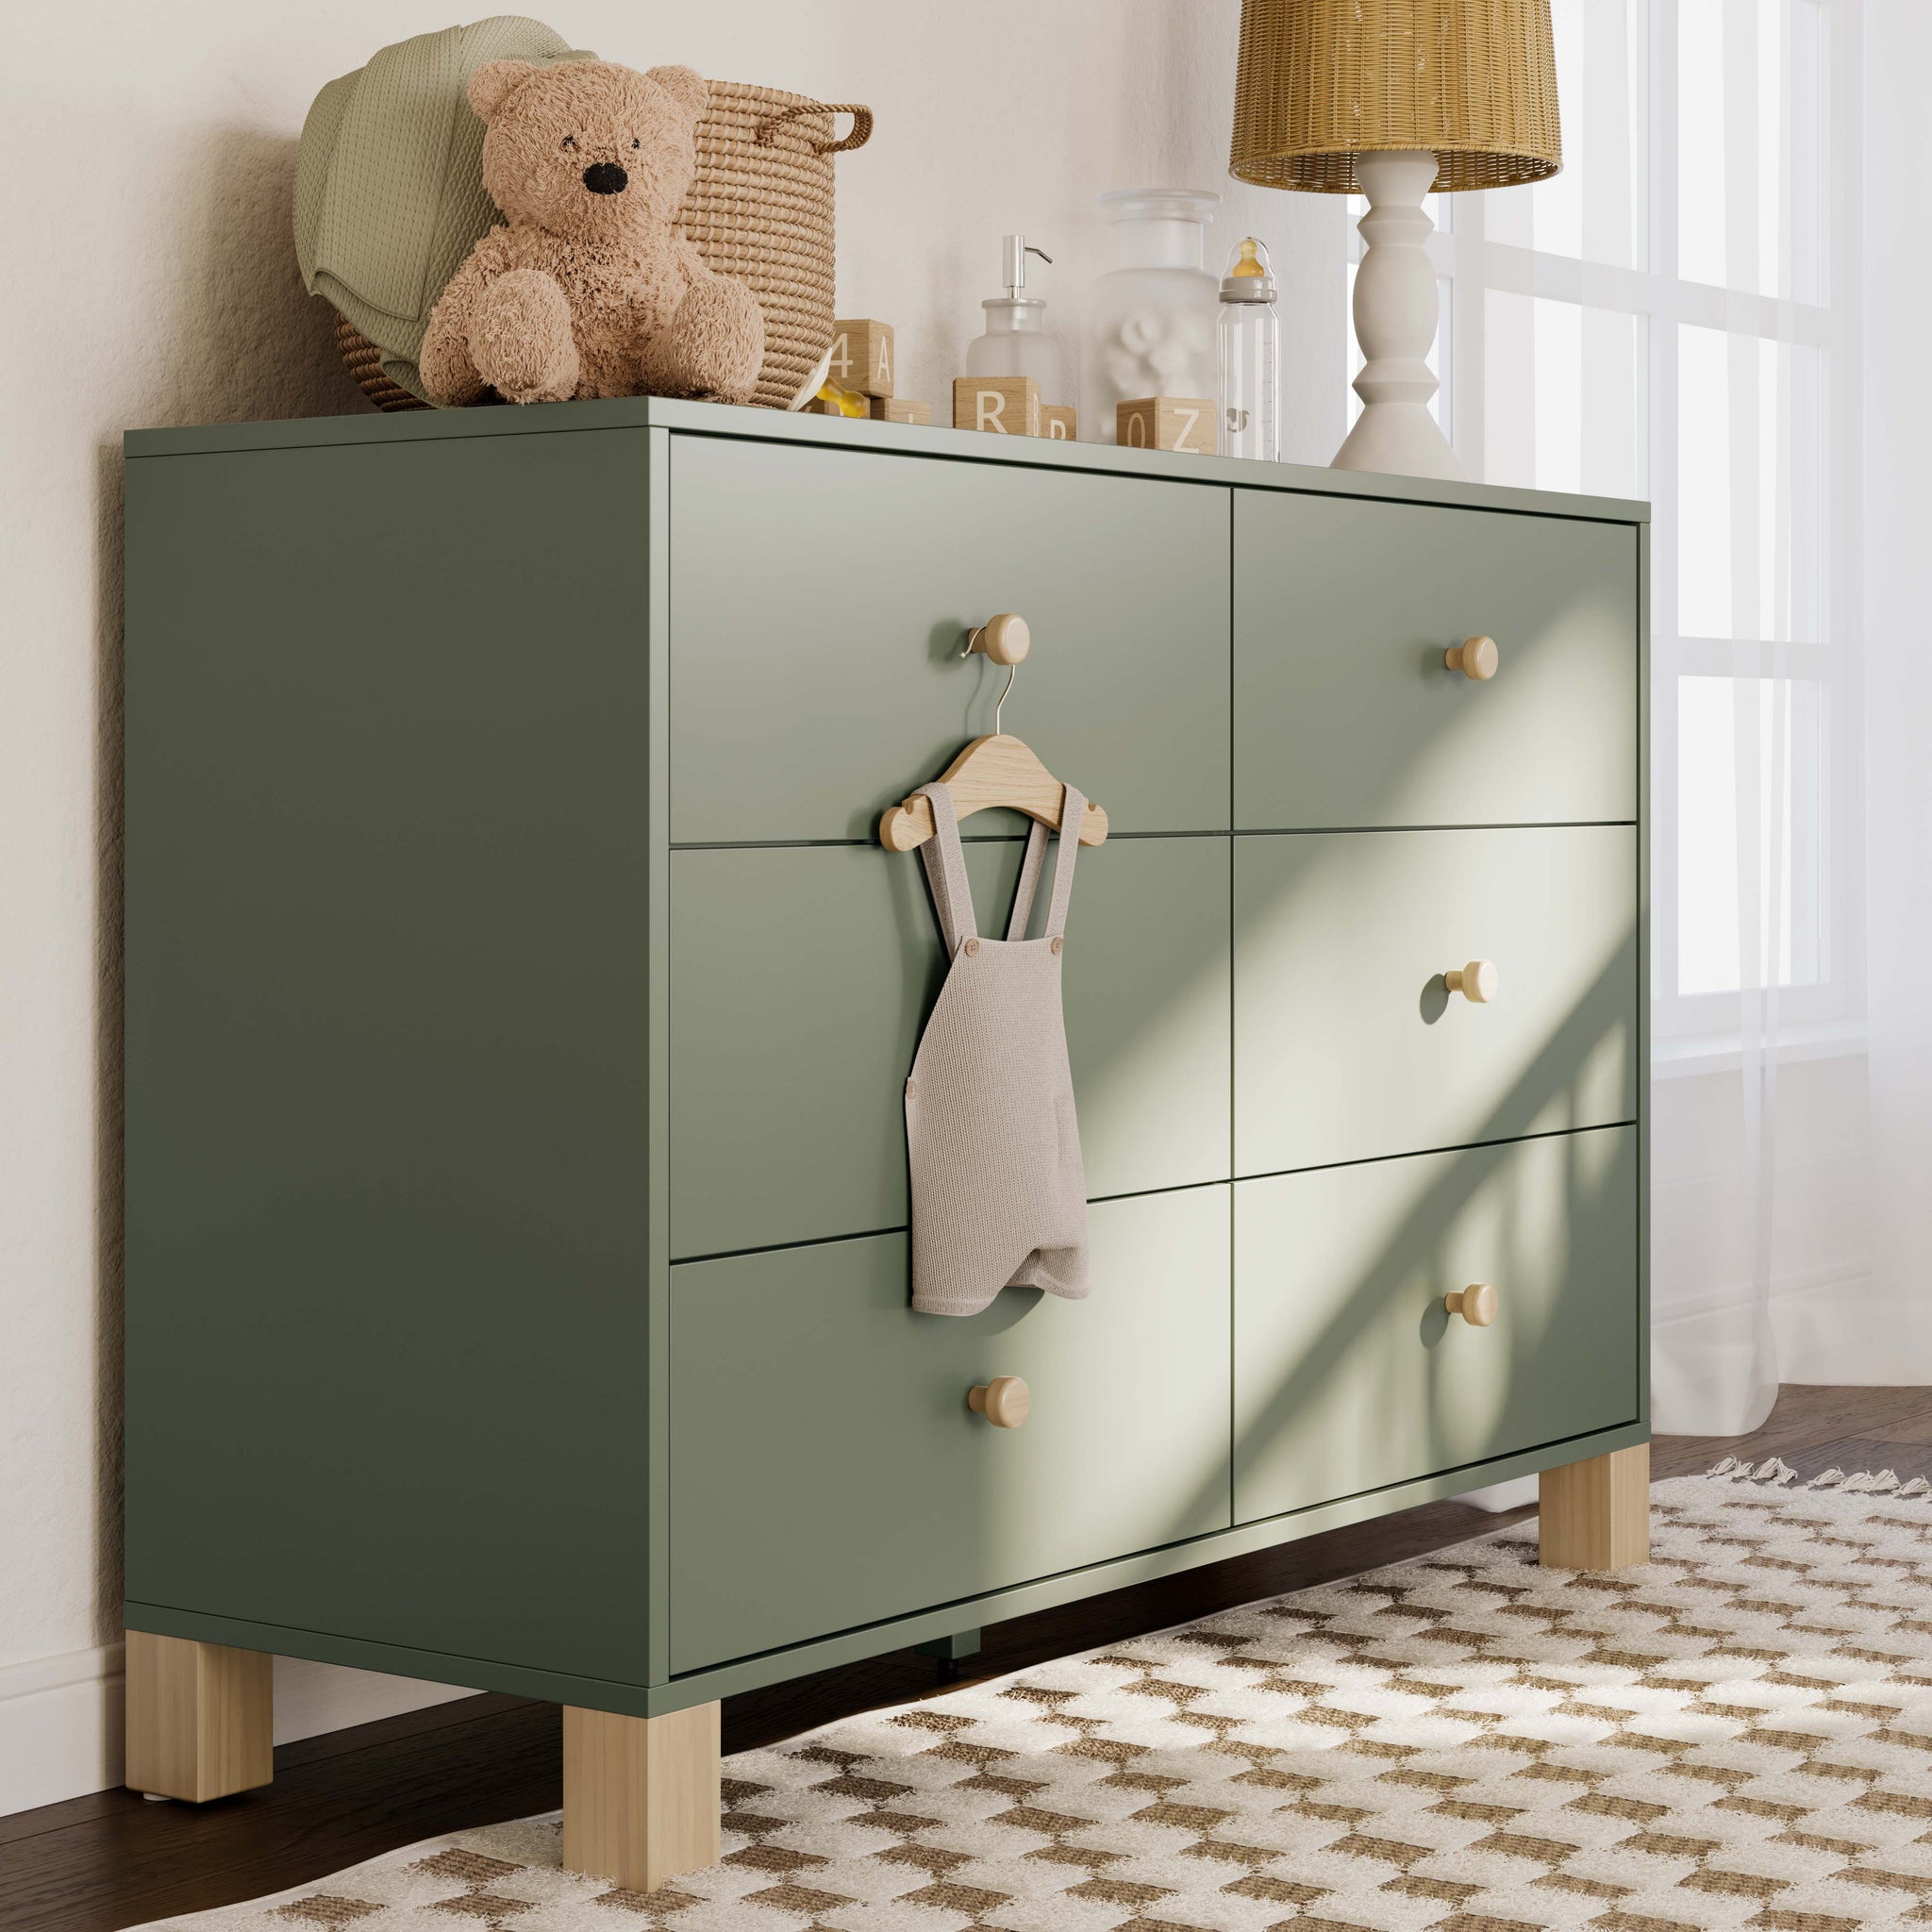 Olive dresser with driftwood knobs in a nursery